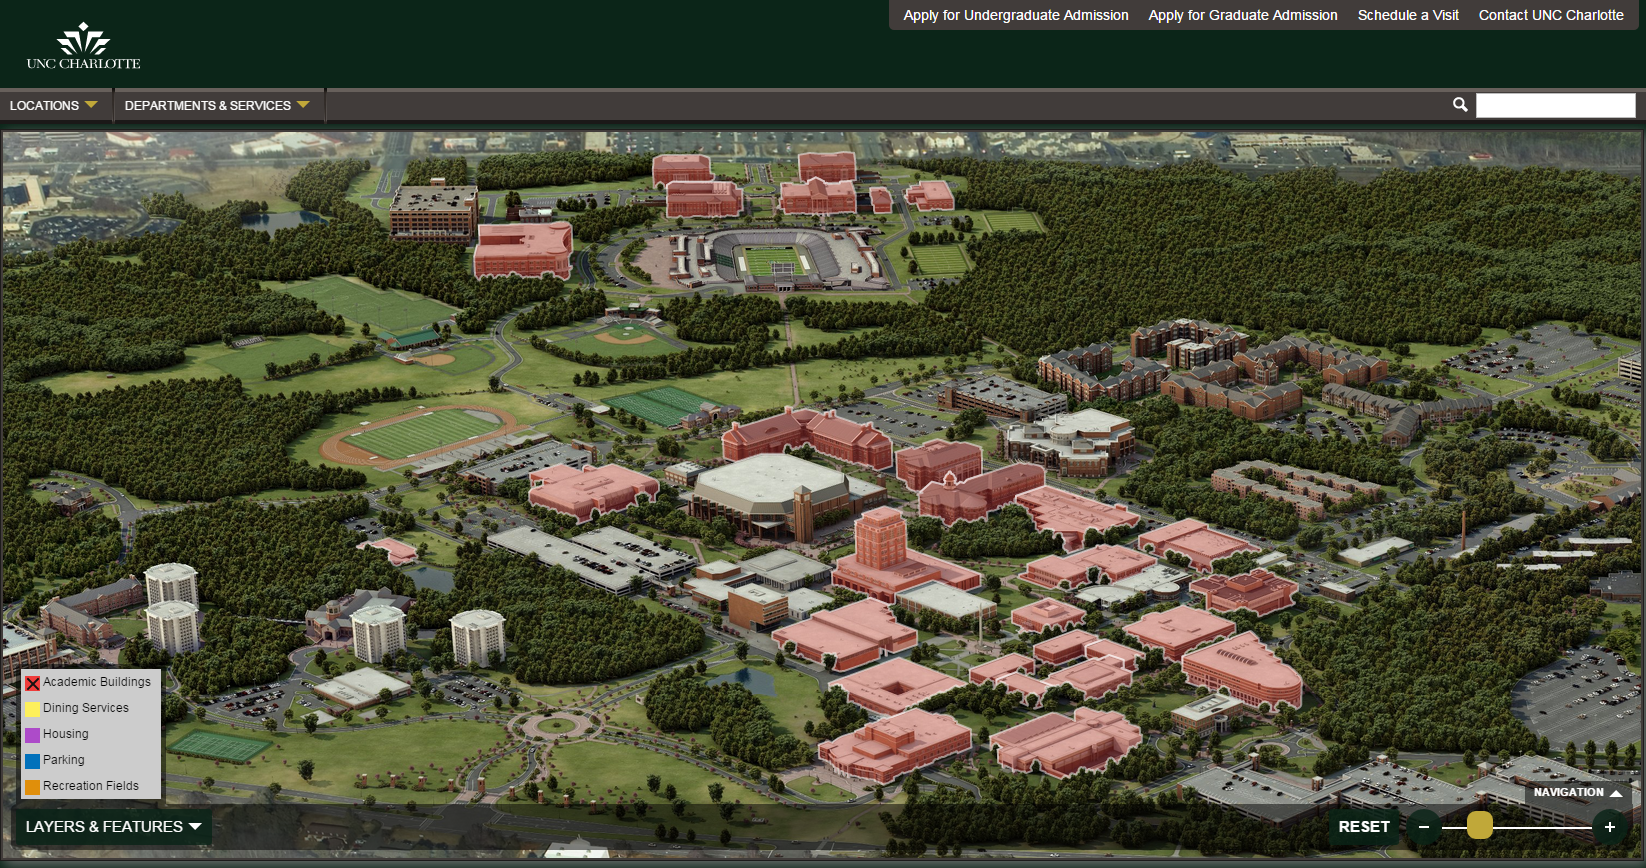 Graphical Layers on Interactive Campus Maps